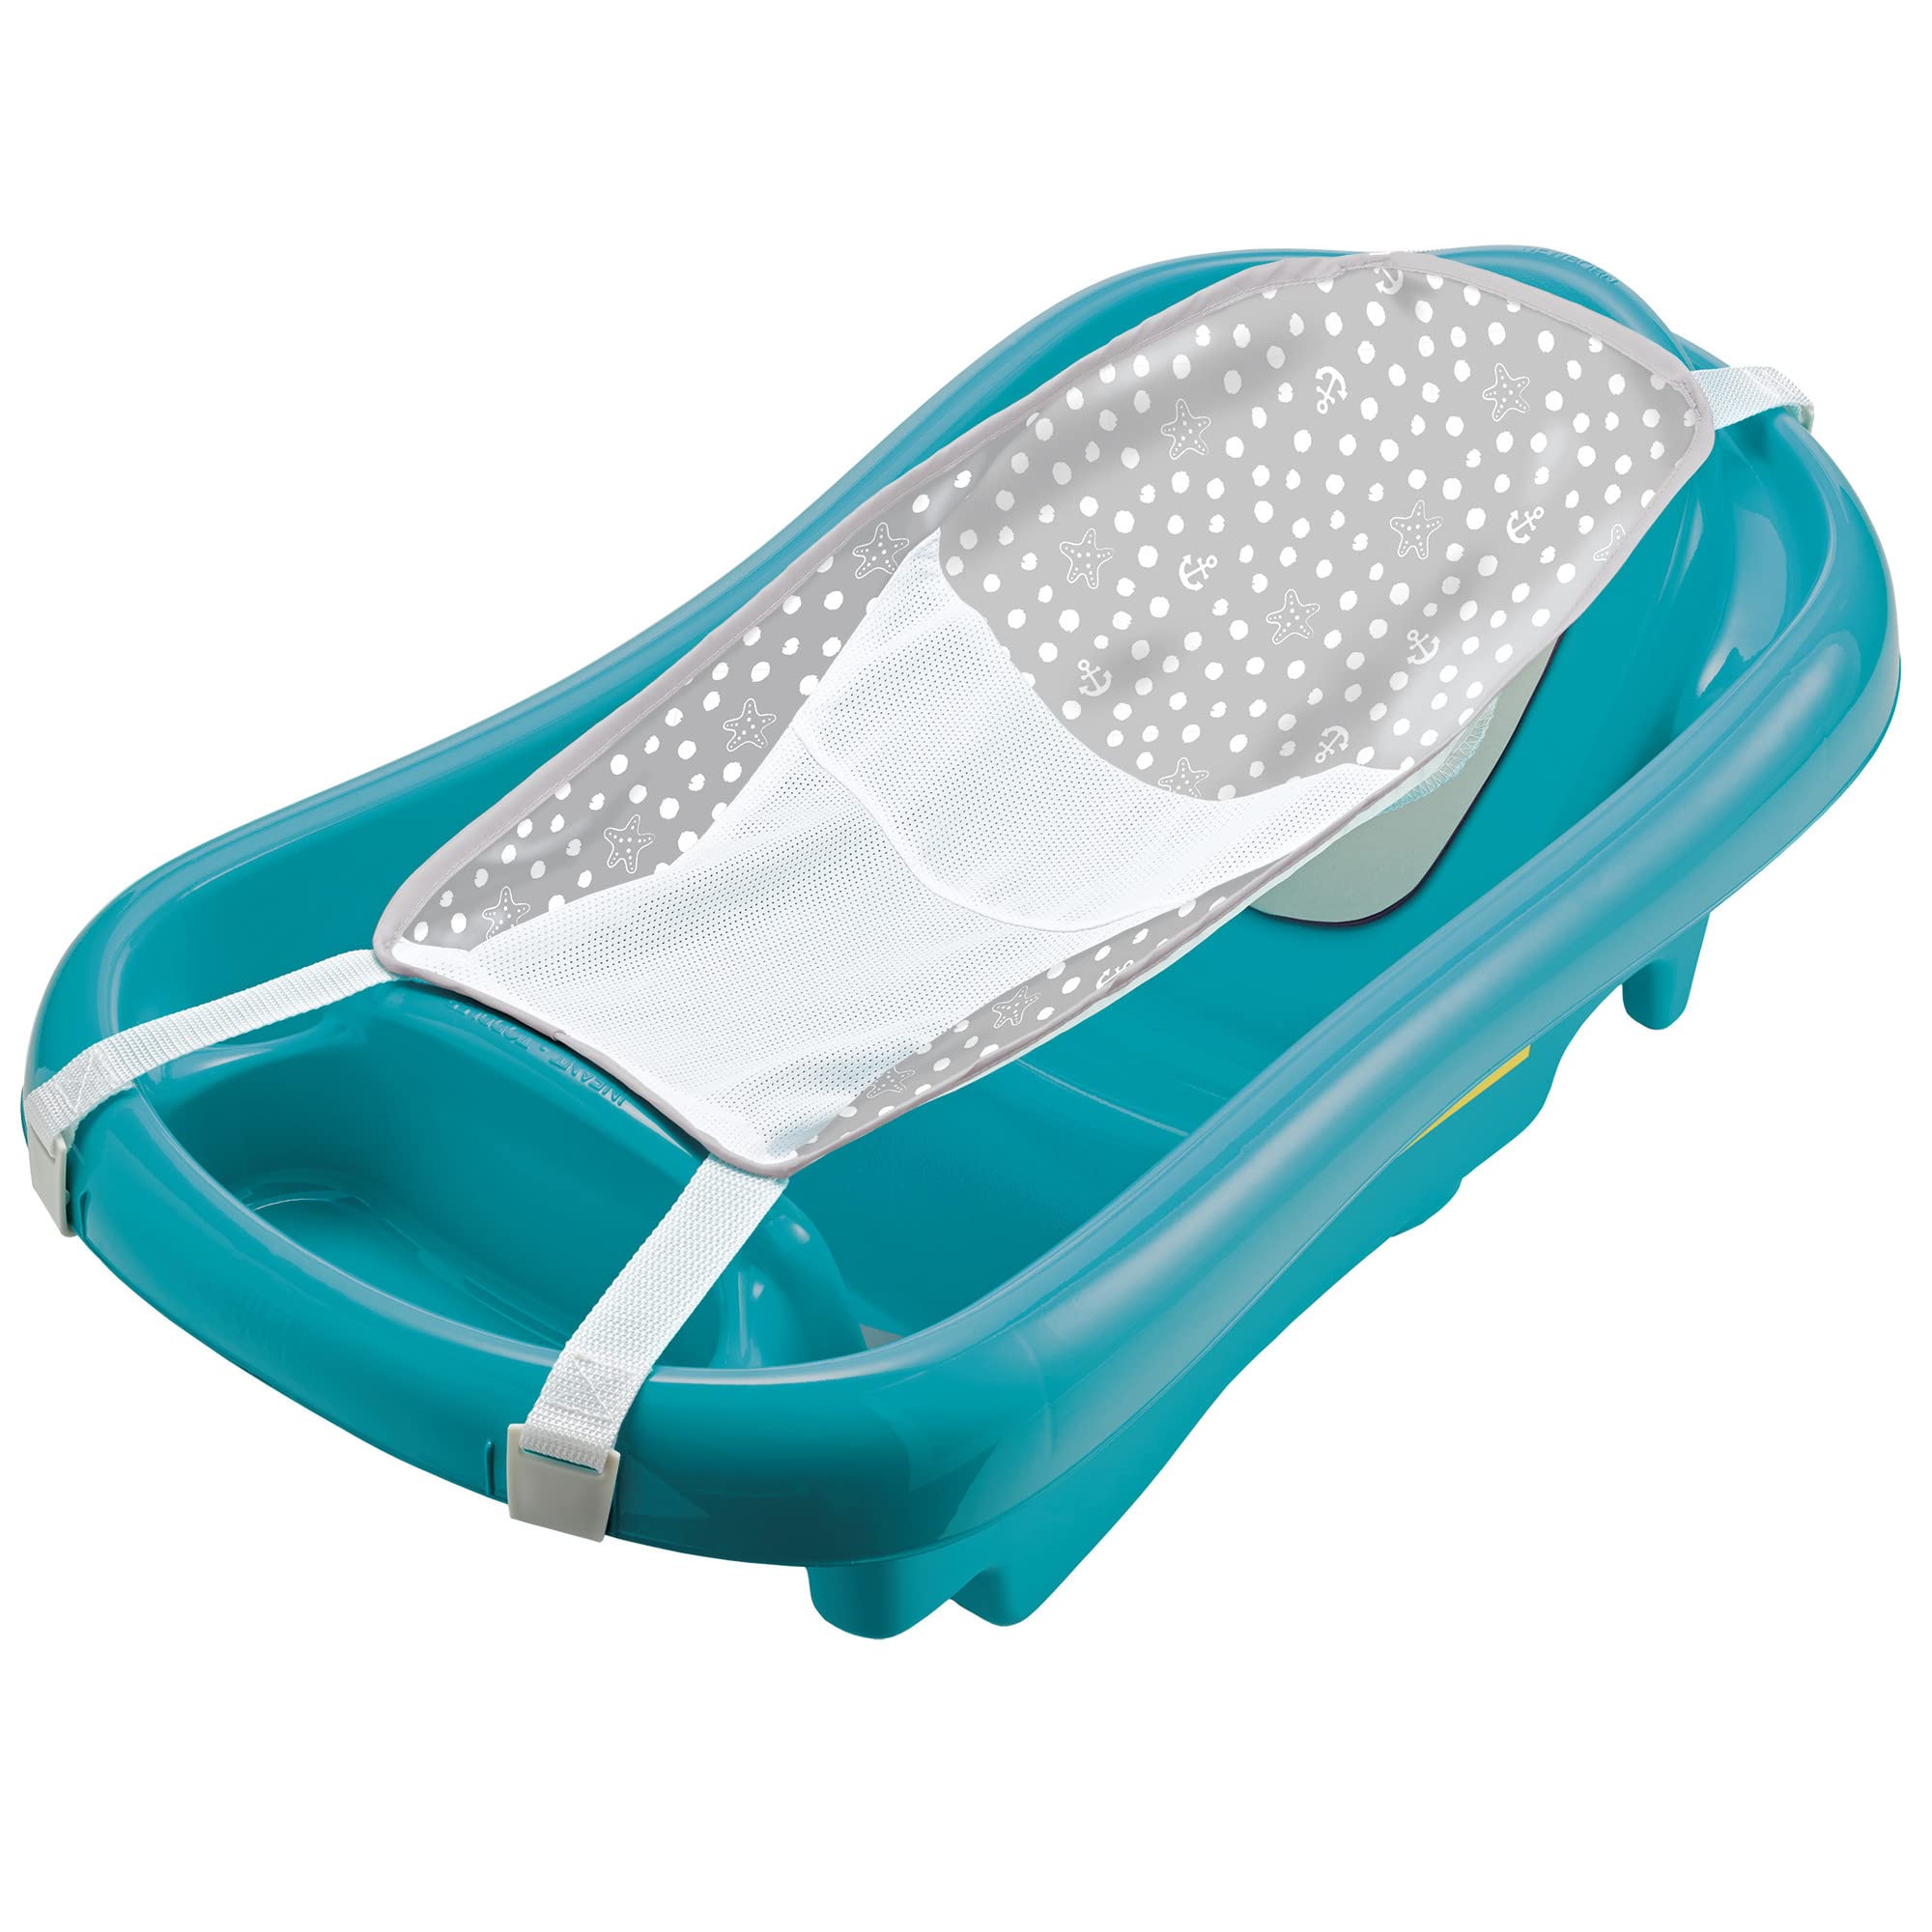 The First Years Sure Comfort Deluxe Adjustable Baby Bathtub - Baby Tubs For Infants to Toddler - Includes Infant Bath Sling - Aqua